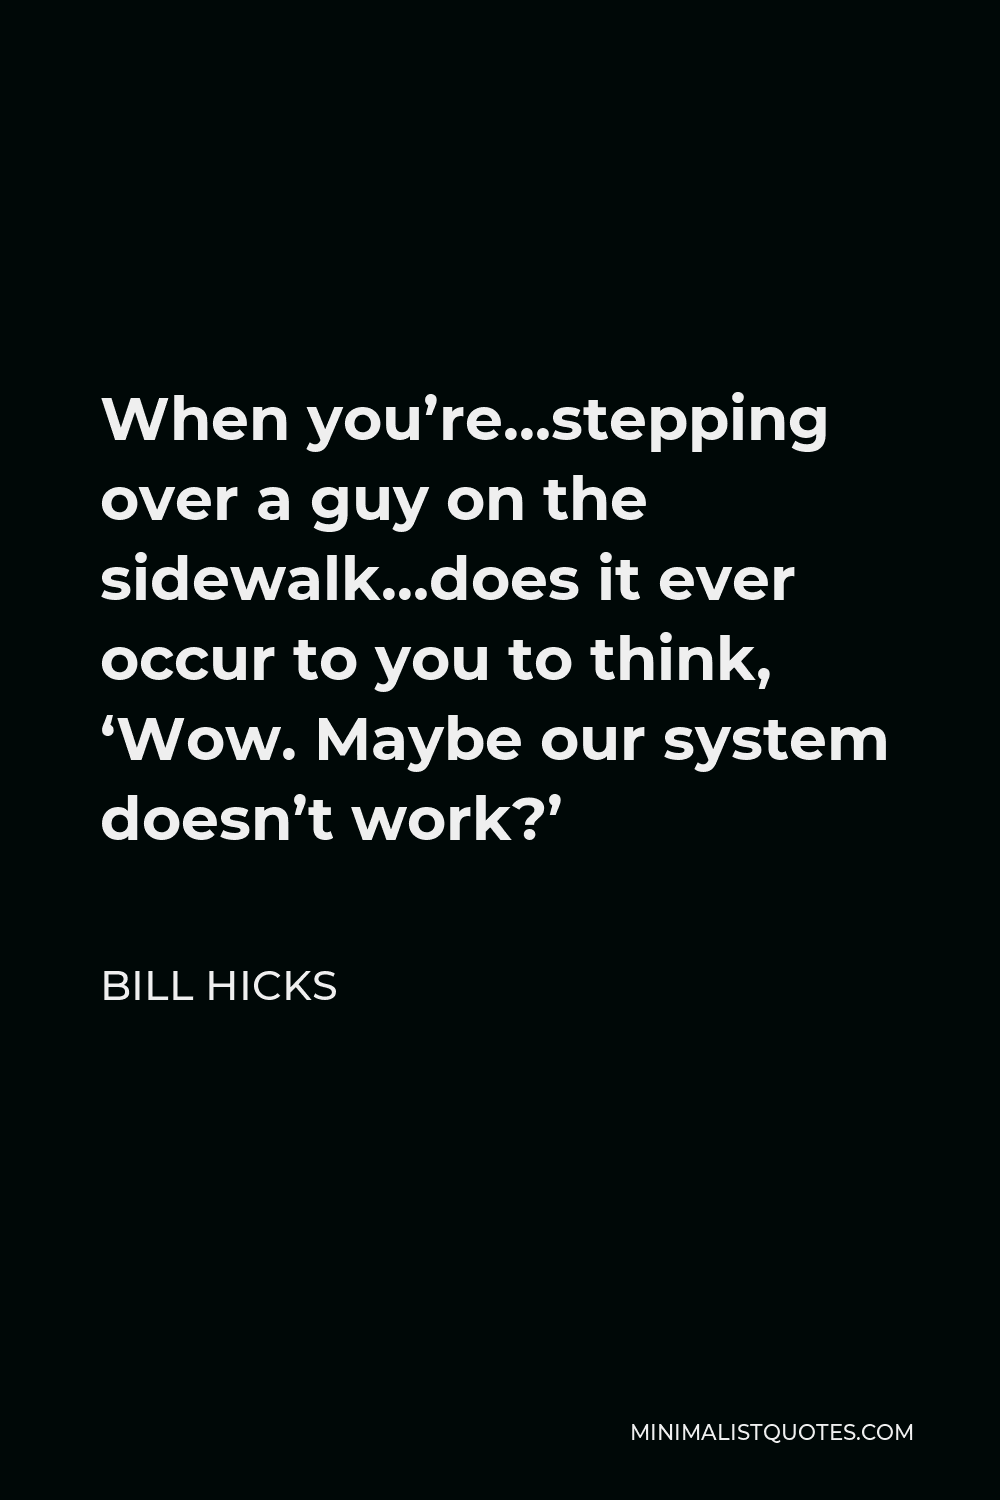 Bill Hicks Quote - When you’re…stepping over a guy on the sidewalk…does it ever occur to you to think, ‘Wow. Maybe our system doesn’t work?’